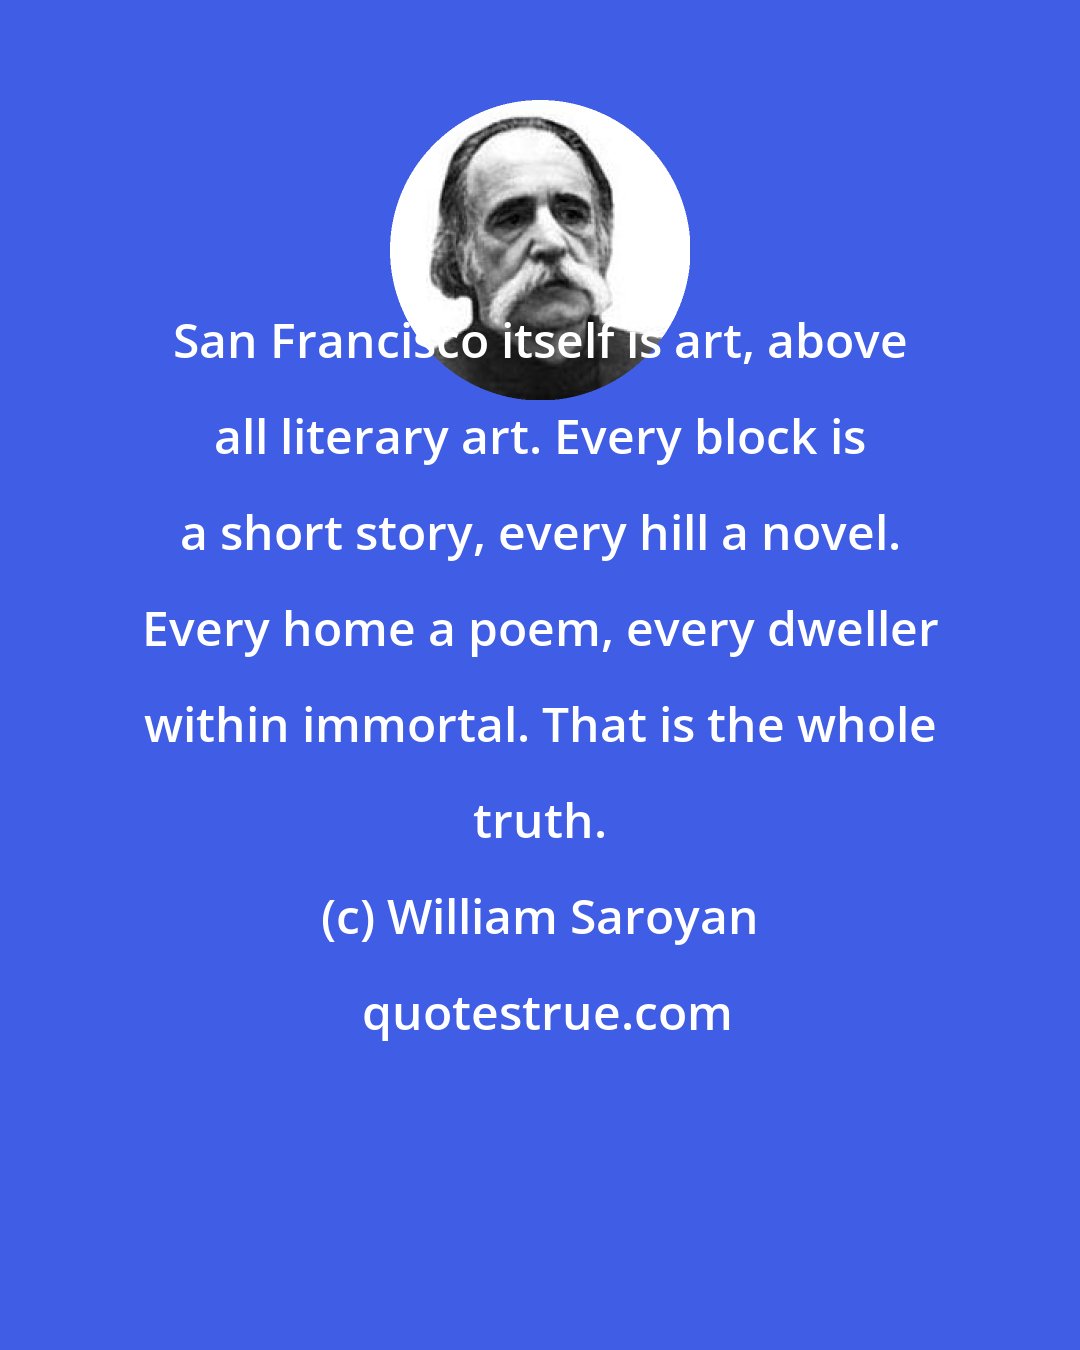 William Saroyan: San Francisco itself is art, above all literary art. Every block is a short story, every hill a novel. Every home a poem, every dweller within immortal. That is the whole truth.